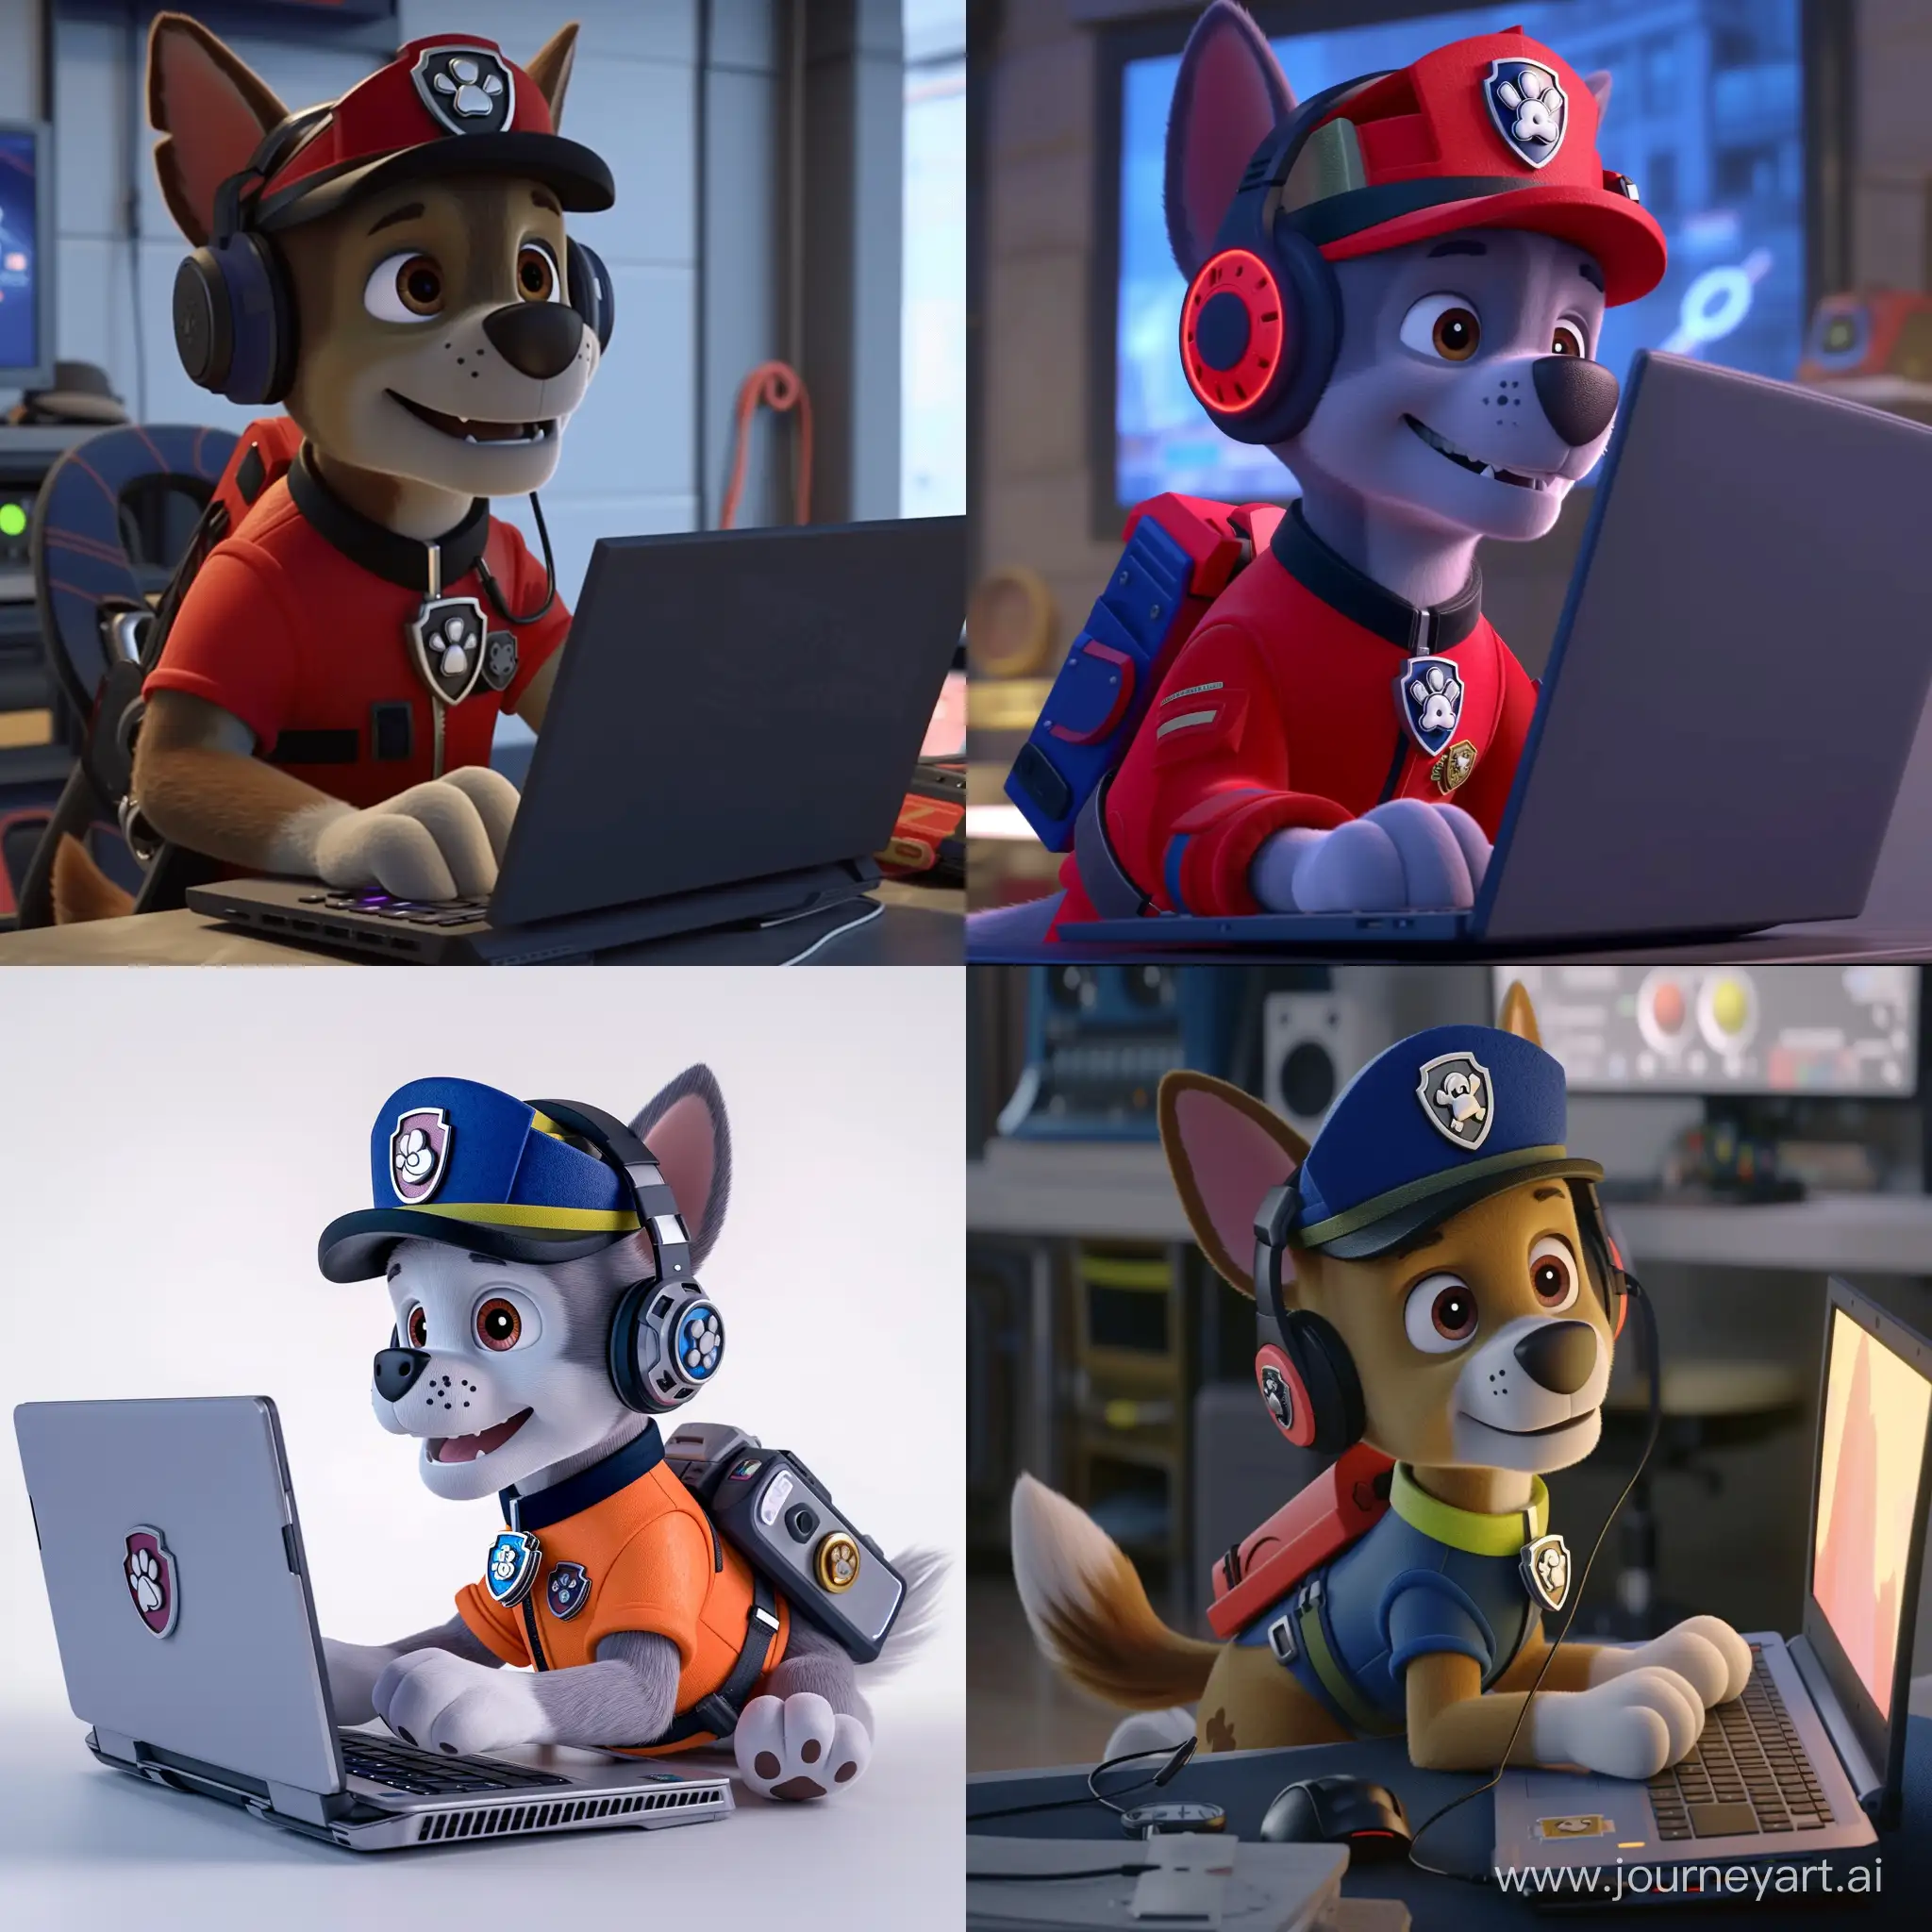 Marshal-from-Paw-Patrol-Engaged-in-Gaming-with-Laptop-and-Headphones